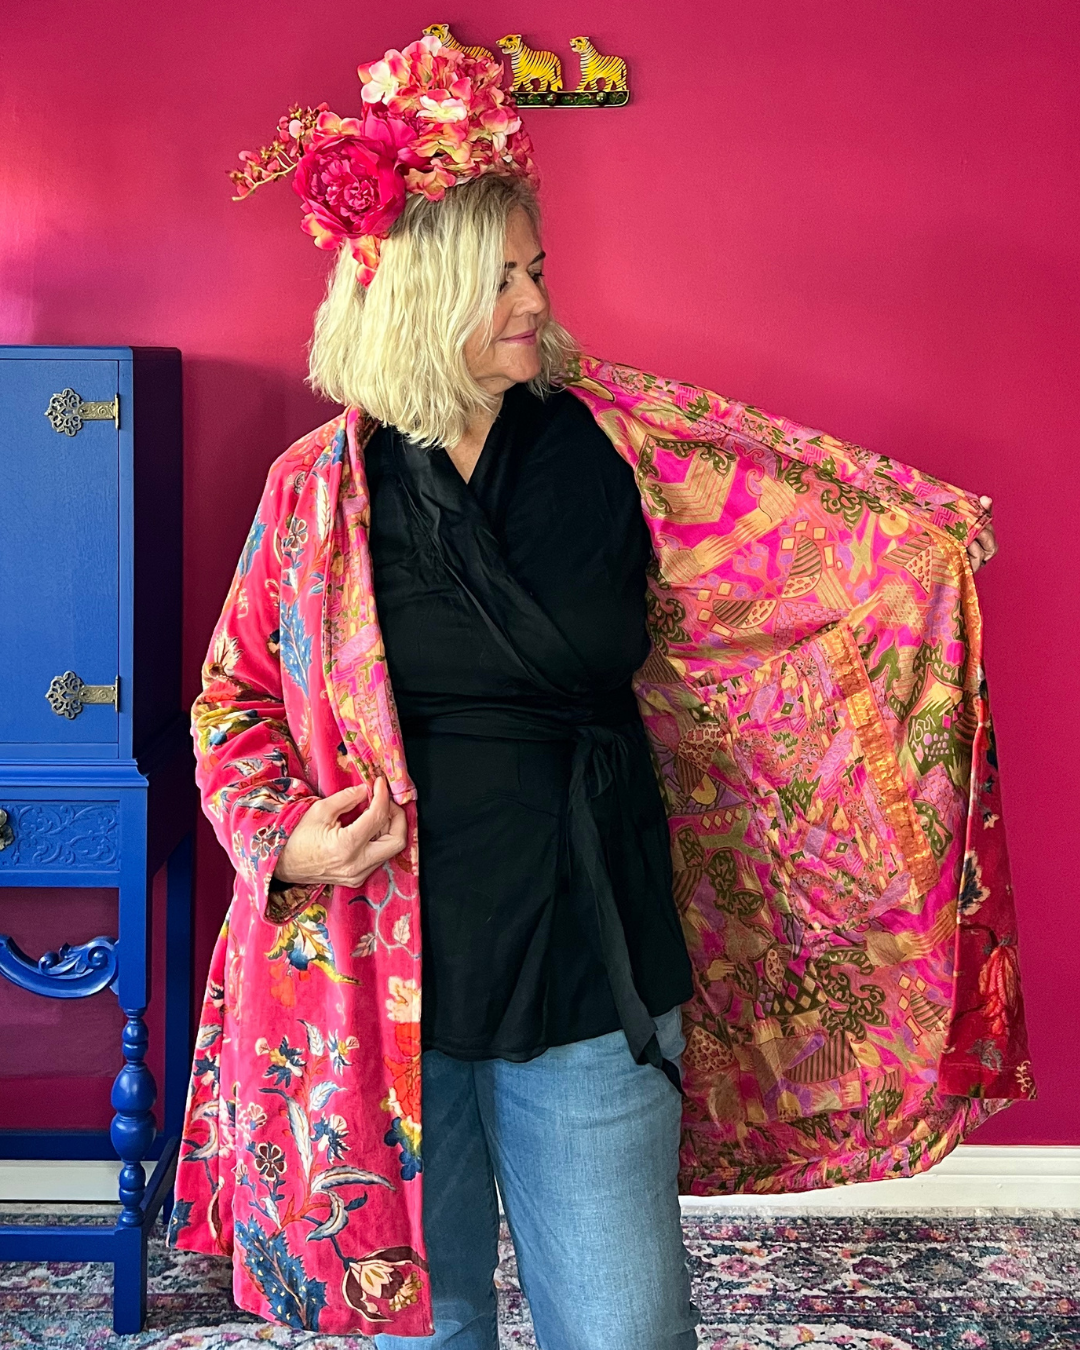 Royal Velvet Jacket - Cherry Bold Floral with Pink, Olive and Gold Silk Lining